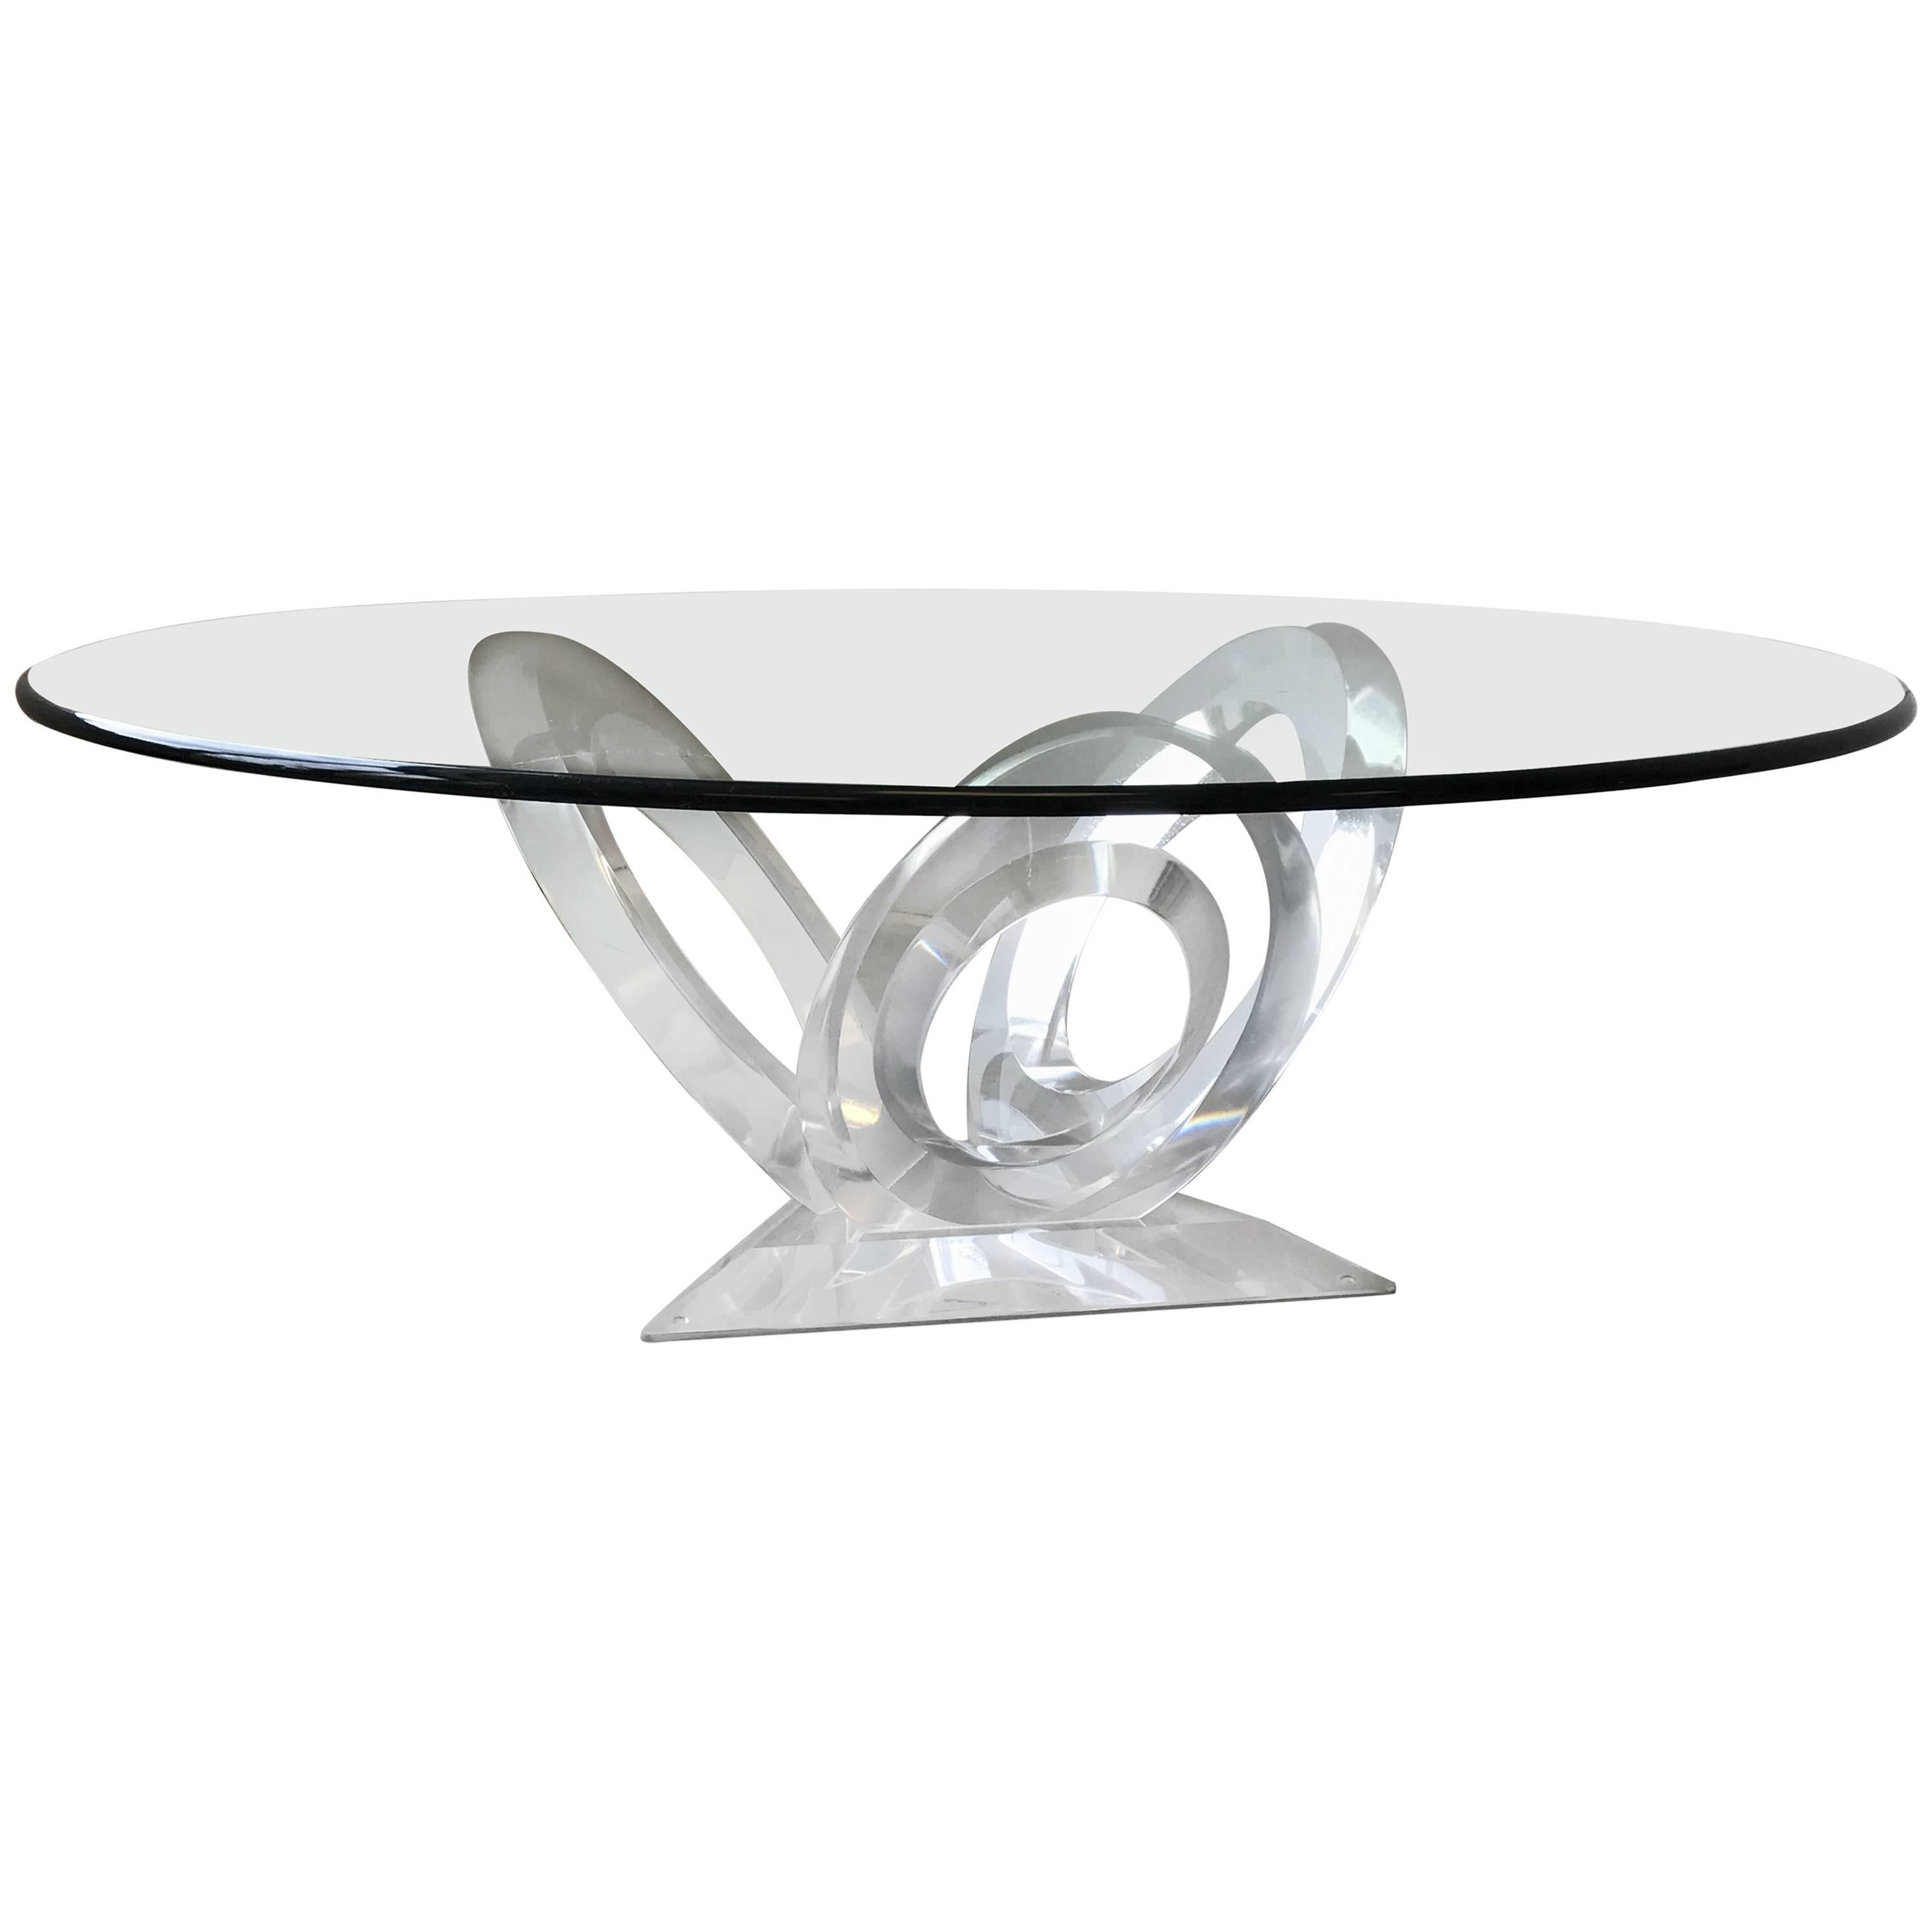 1990s "Eclipse of Time" Lucite and Glass Coffee Table by Mikhail Loznikov